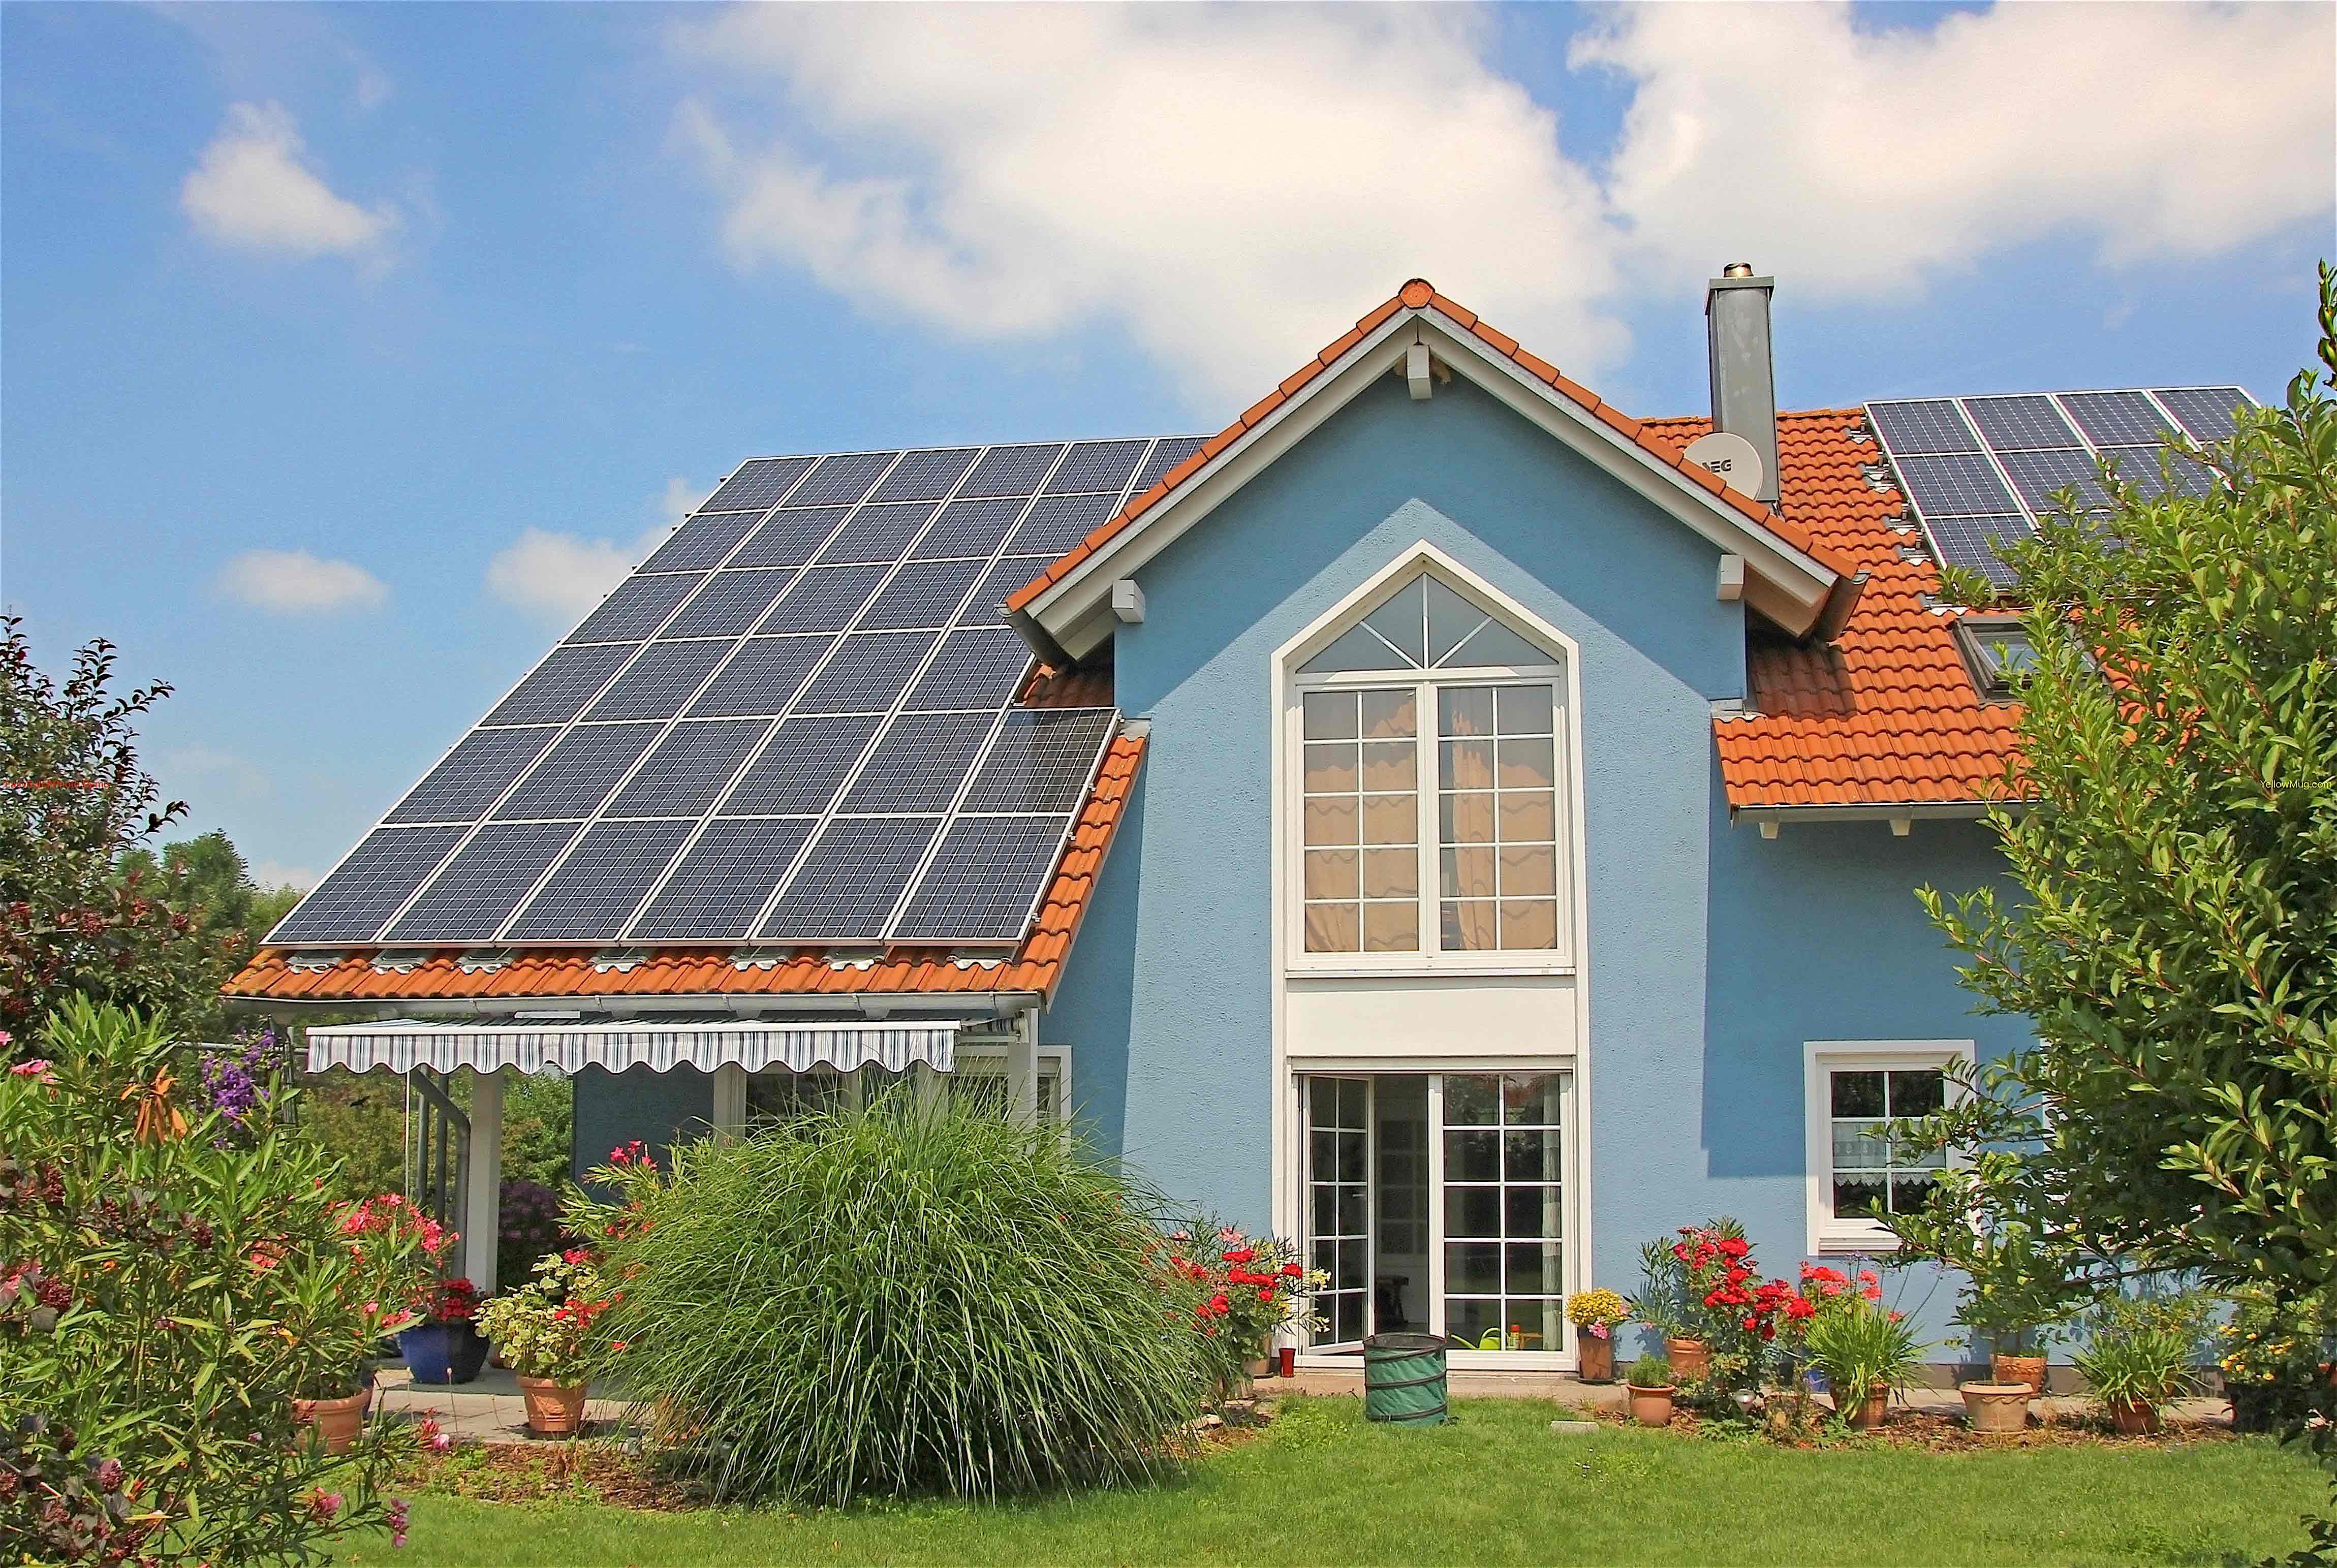 Some Of The Main Advantages Of Green Home Renovation For Homeowner